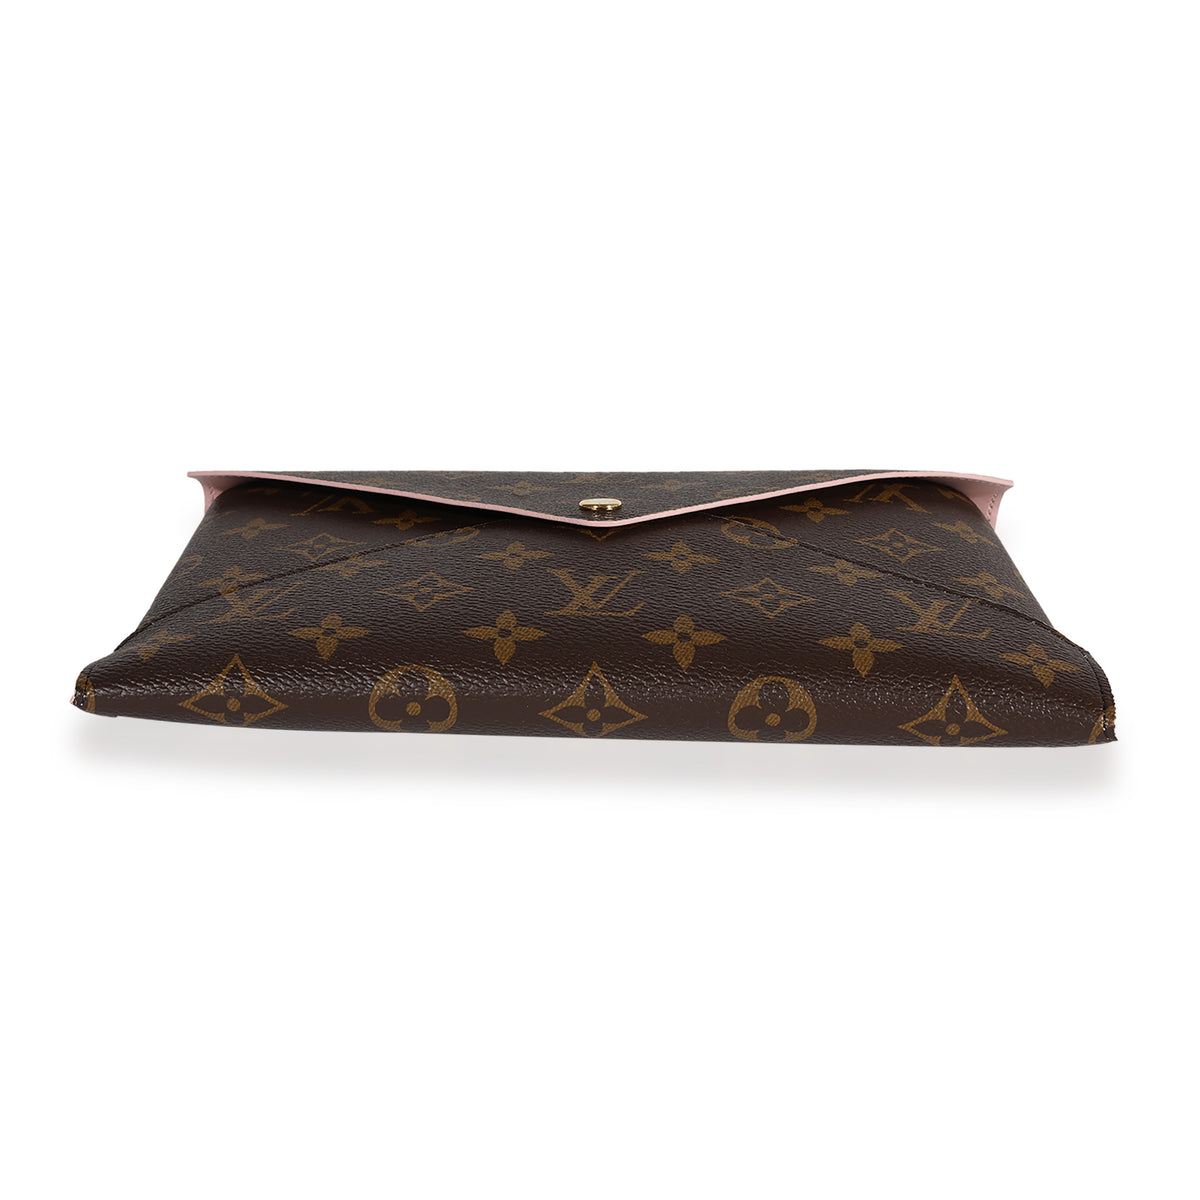 Louis Vuitton - Authenticated Kirigami Clutch Bag - Leather Brown for Women, Never Worn